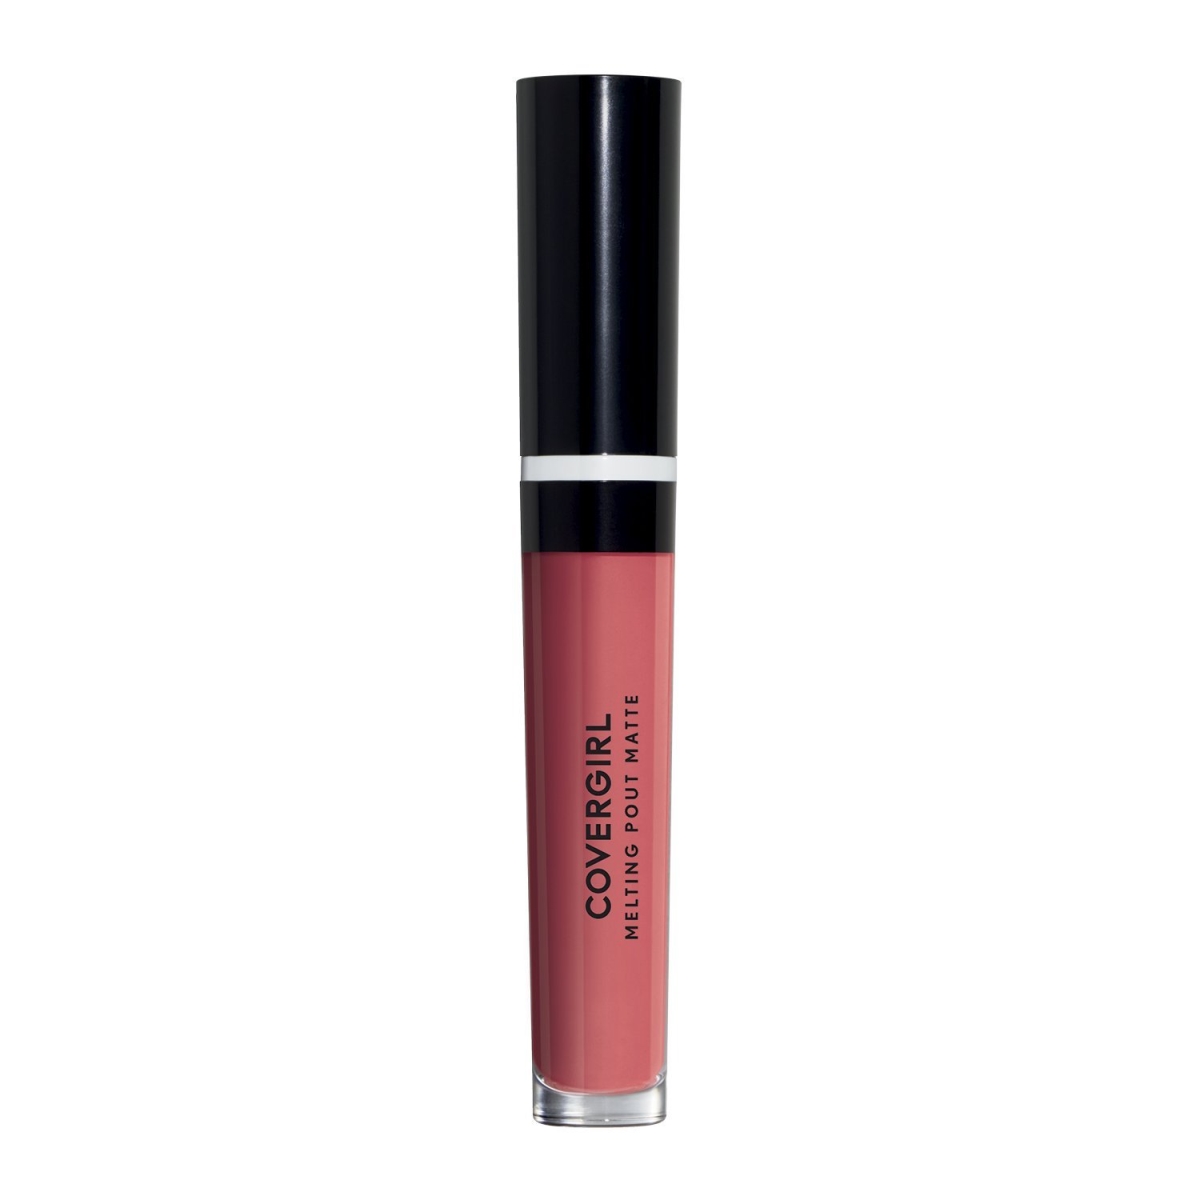 8291322 Covergirl Melting Pout Matte Liquid Lipstick, 310 Coral Chronicles - Pack Of 2